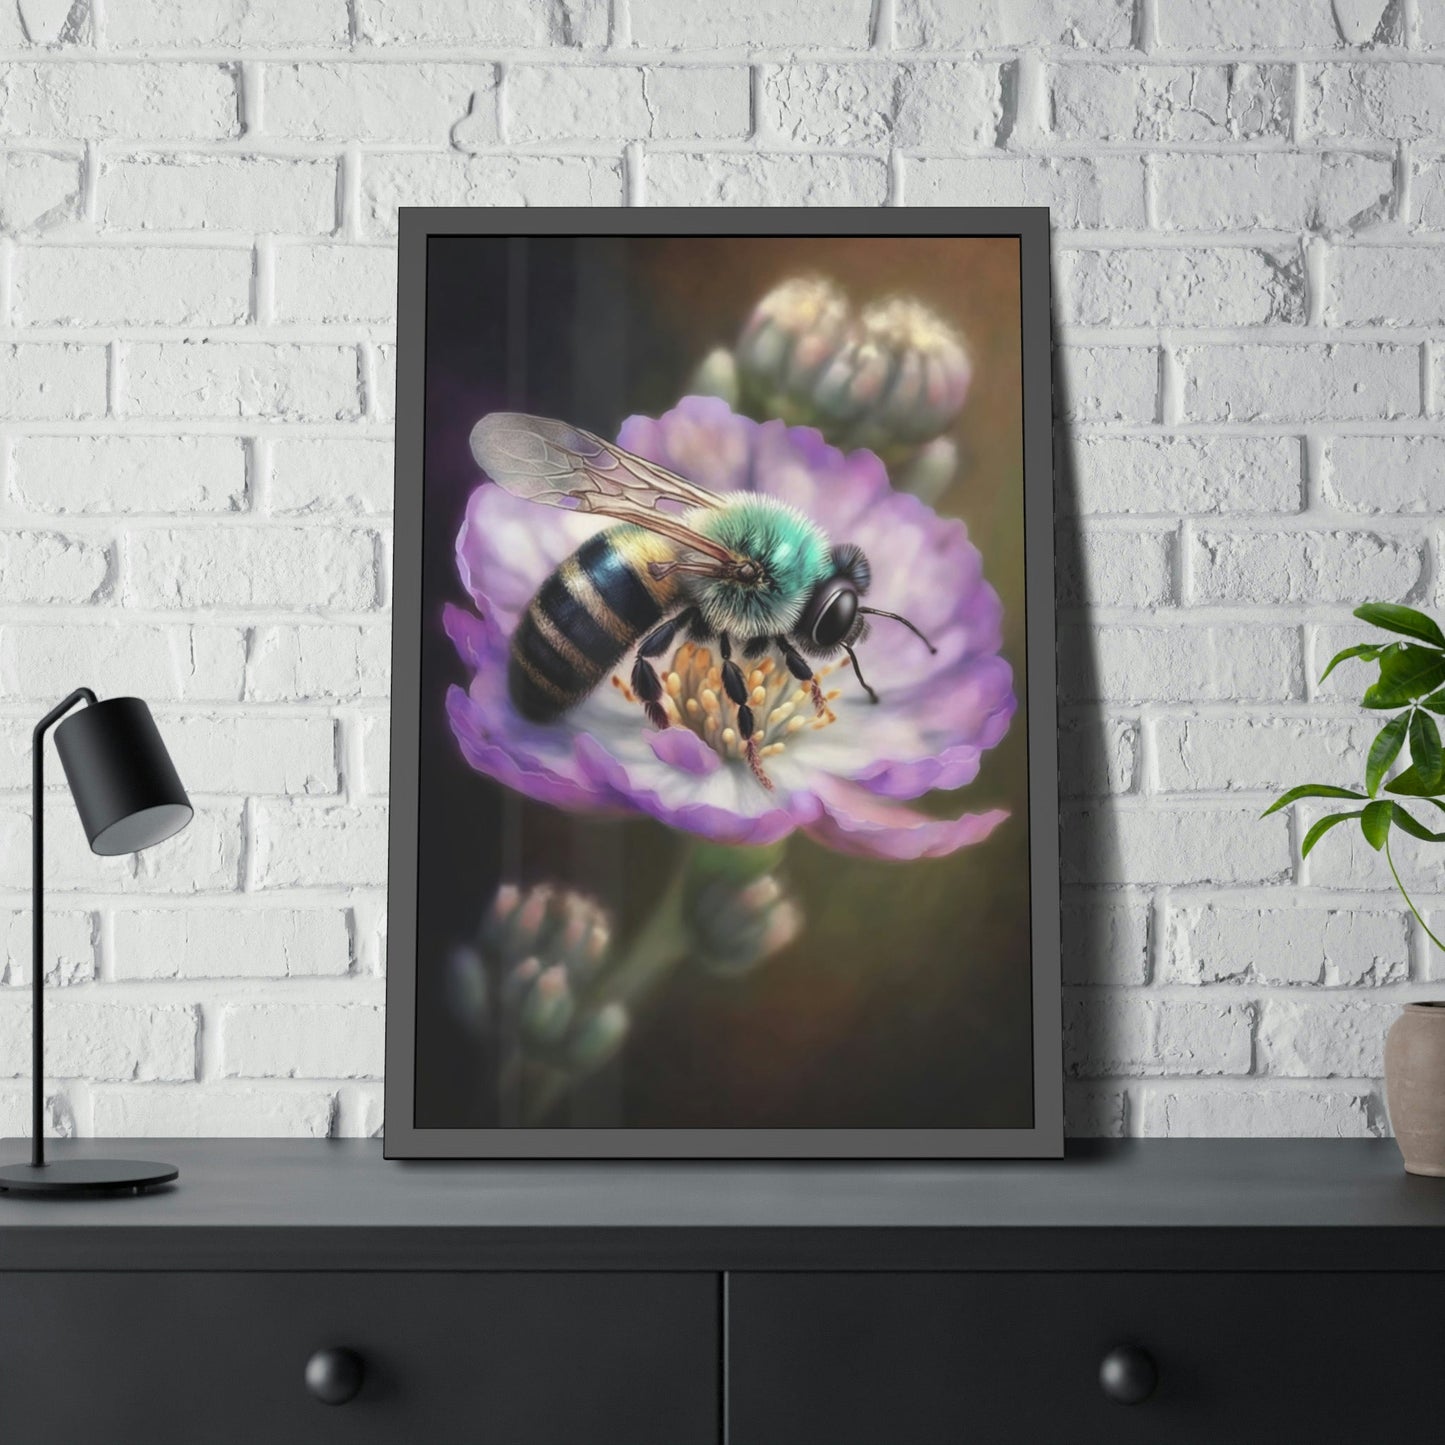 A Tiny Miracle: A Framed Poster & Canvas Print of a Bee Collecting Pollen on a Flower